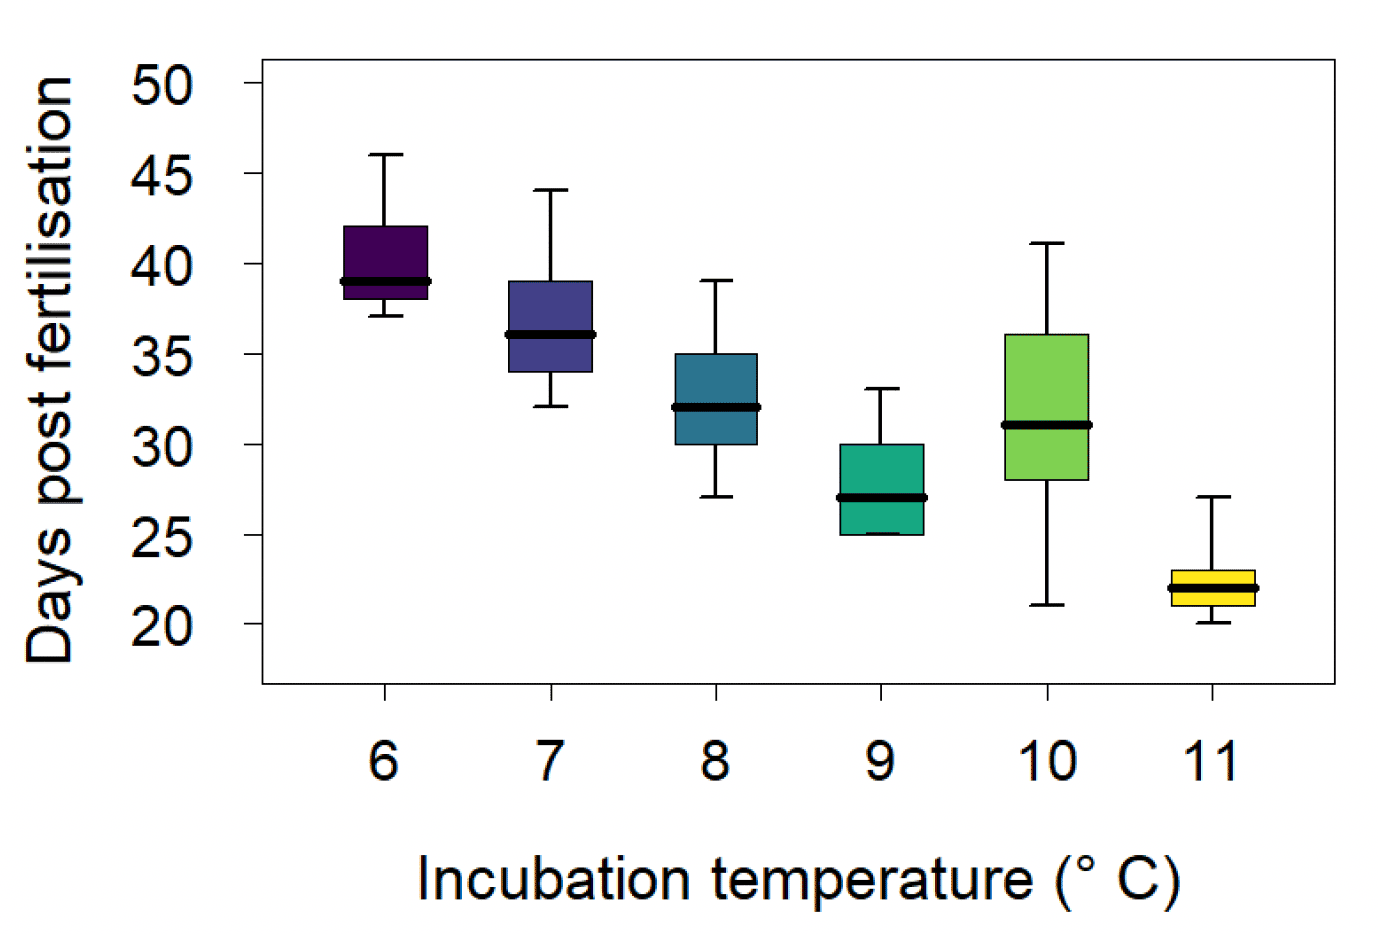 A graph of boxplots showing the effect of incubation temperature (ranging from 6 to 11 degrees centigrade) on egg development time (ranging from 20 to 50 days post fertilisation). There is a clear downward trend, indicating that increasing water temperature during the incubation period results in shorter egg development times.